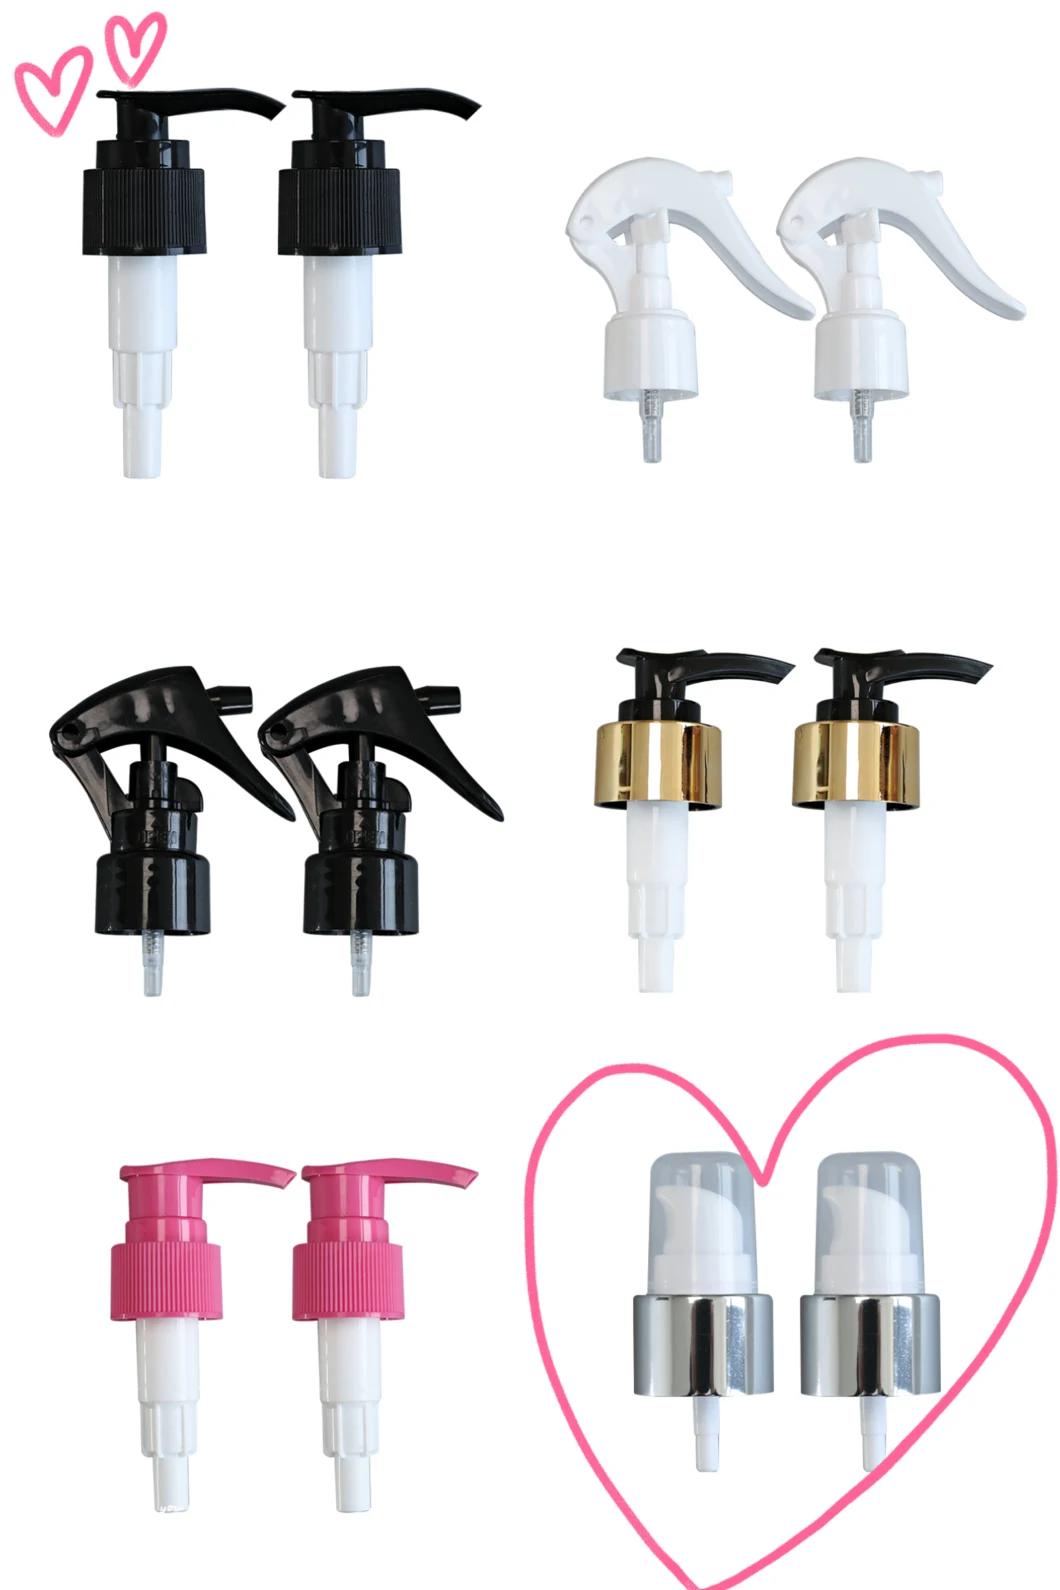 High Quality 24/ 410, 28/ 410 Plastic PP Liquid Dispenser Cosmetic Colorful Hair Care Body / Care Screw Lotion Pump